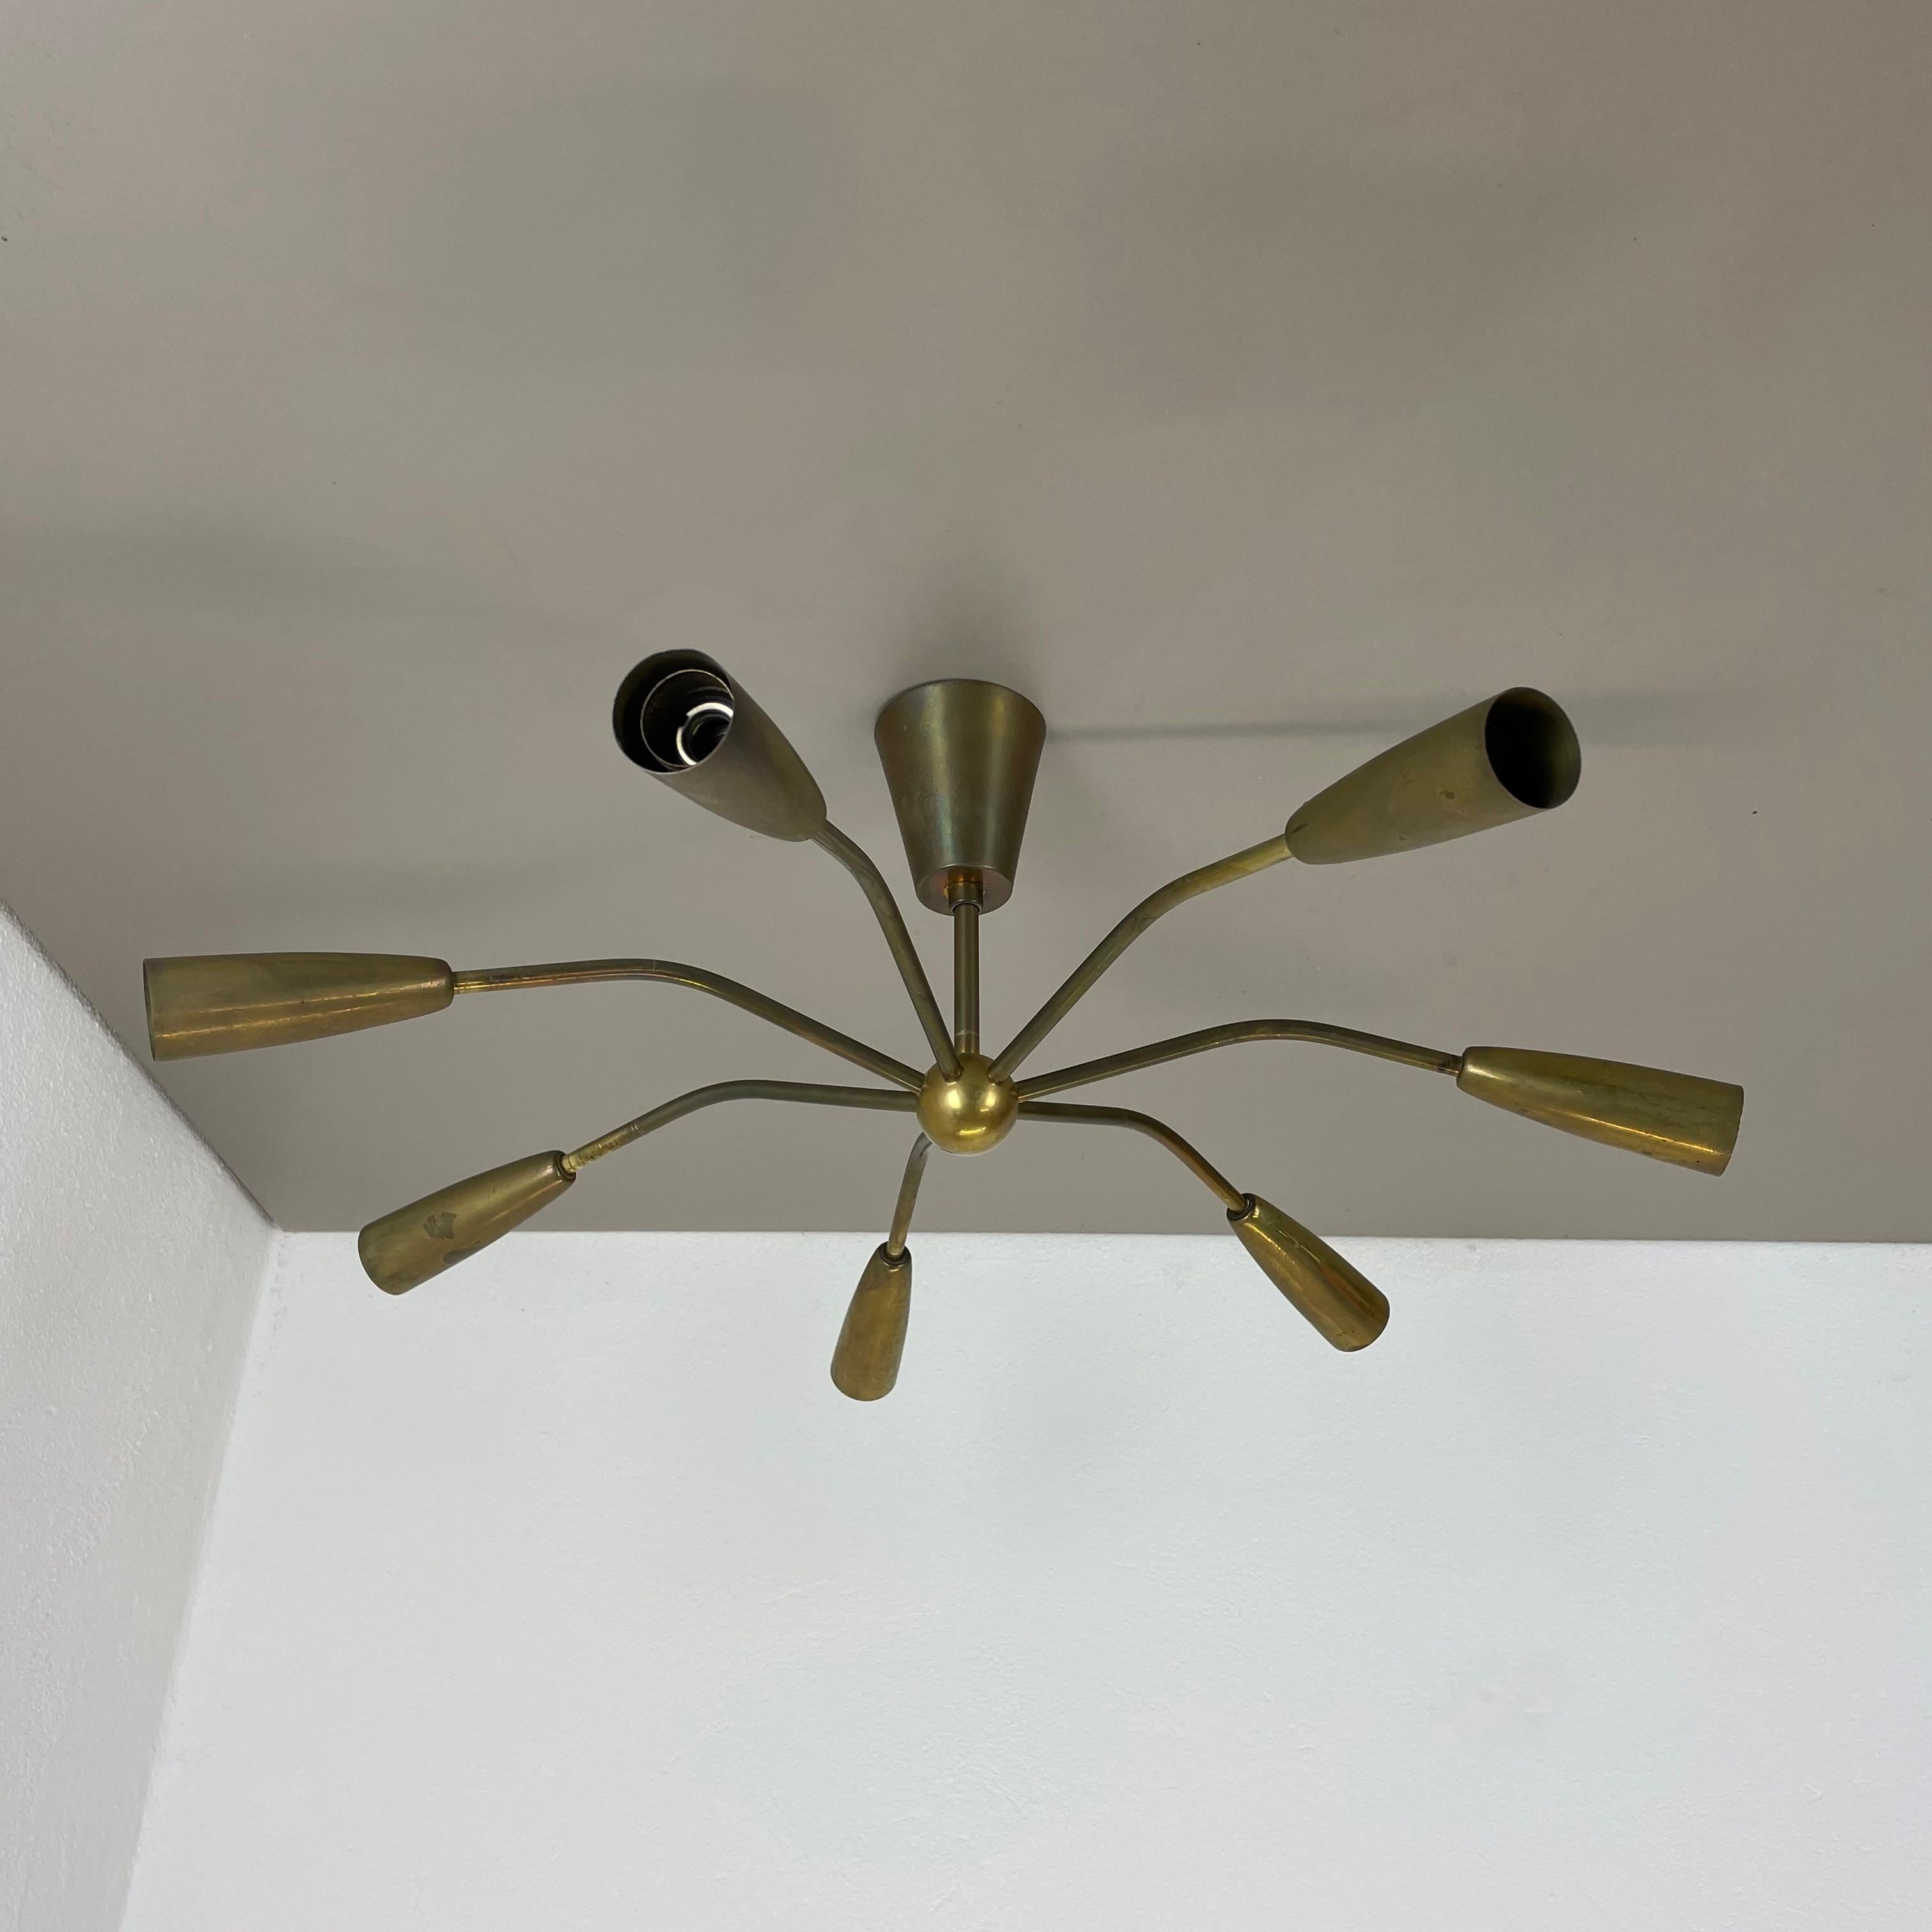 Article:

Ceiling light


Producer:

Origin Italy 
in the manner of Stilnovo, Gio Ponti



Age:

1950s



This modernist light was produced in Italy in the 1950s. It is made from solid metal brass with brass with 7 light arm